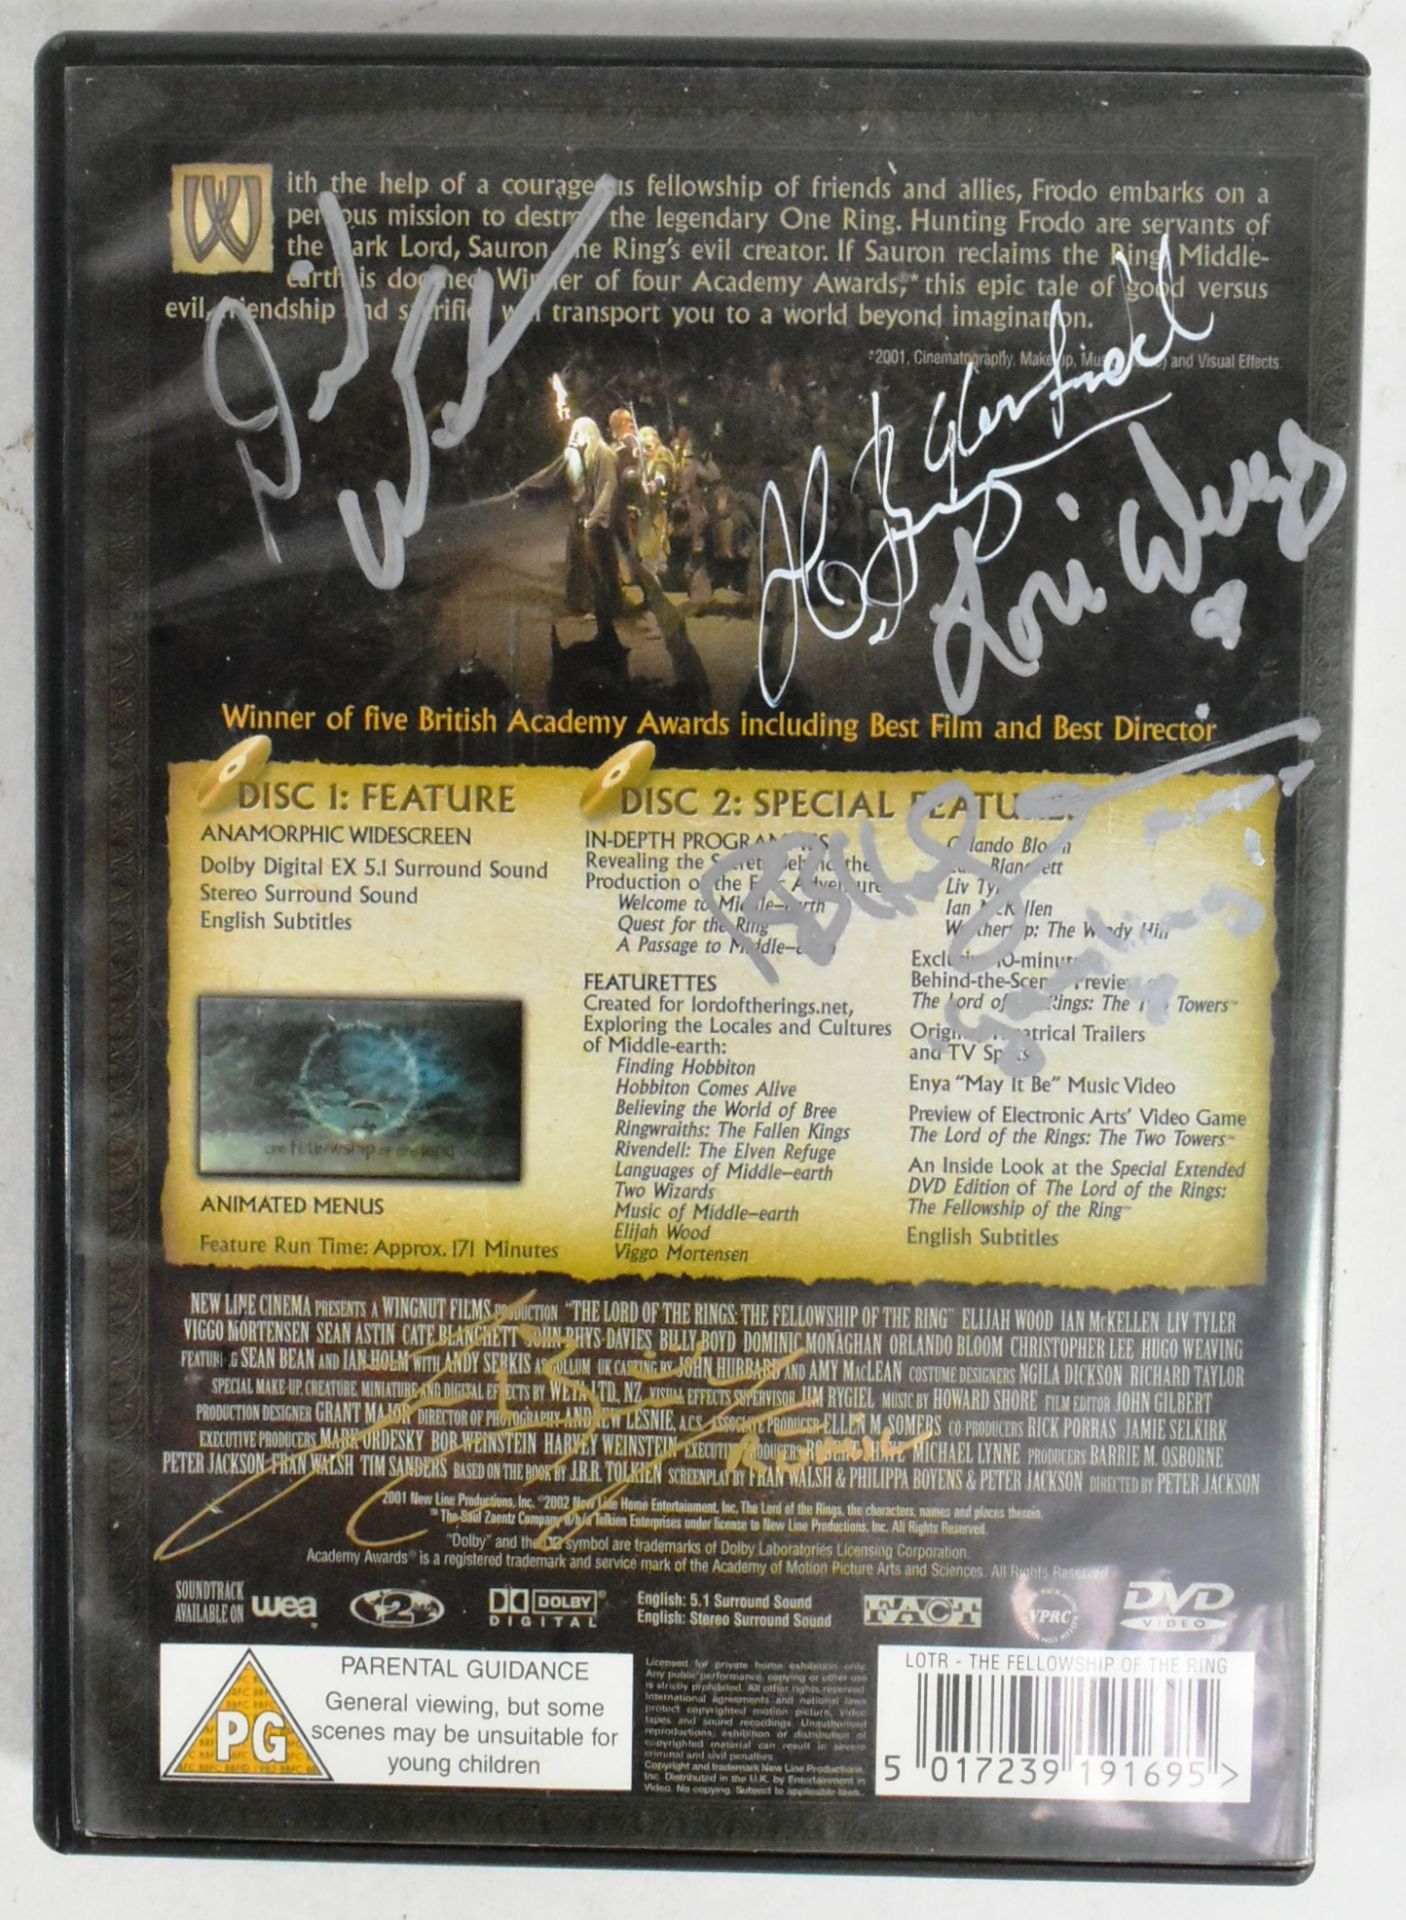 LORD OF THE RINGS - THE FELLOWSHIP OF THE RING - SIGNED DVD - Image 5 of 8